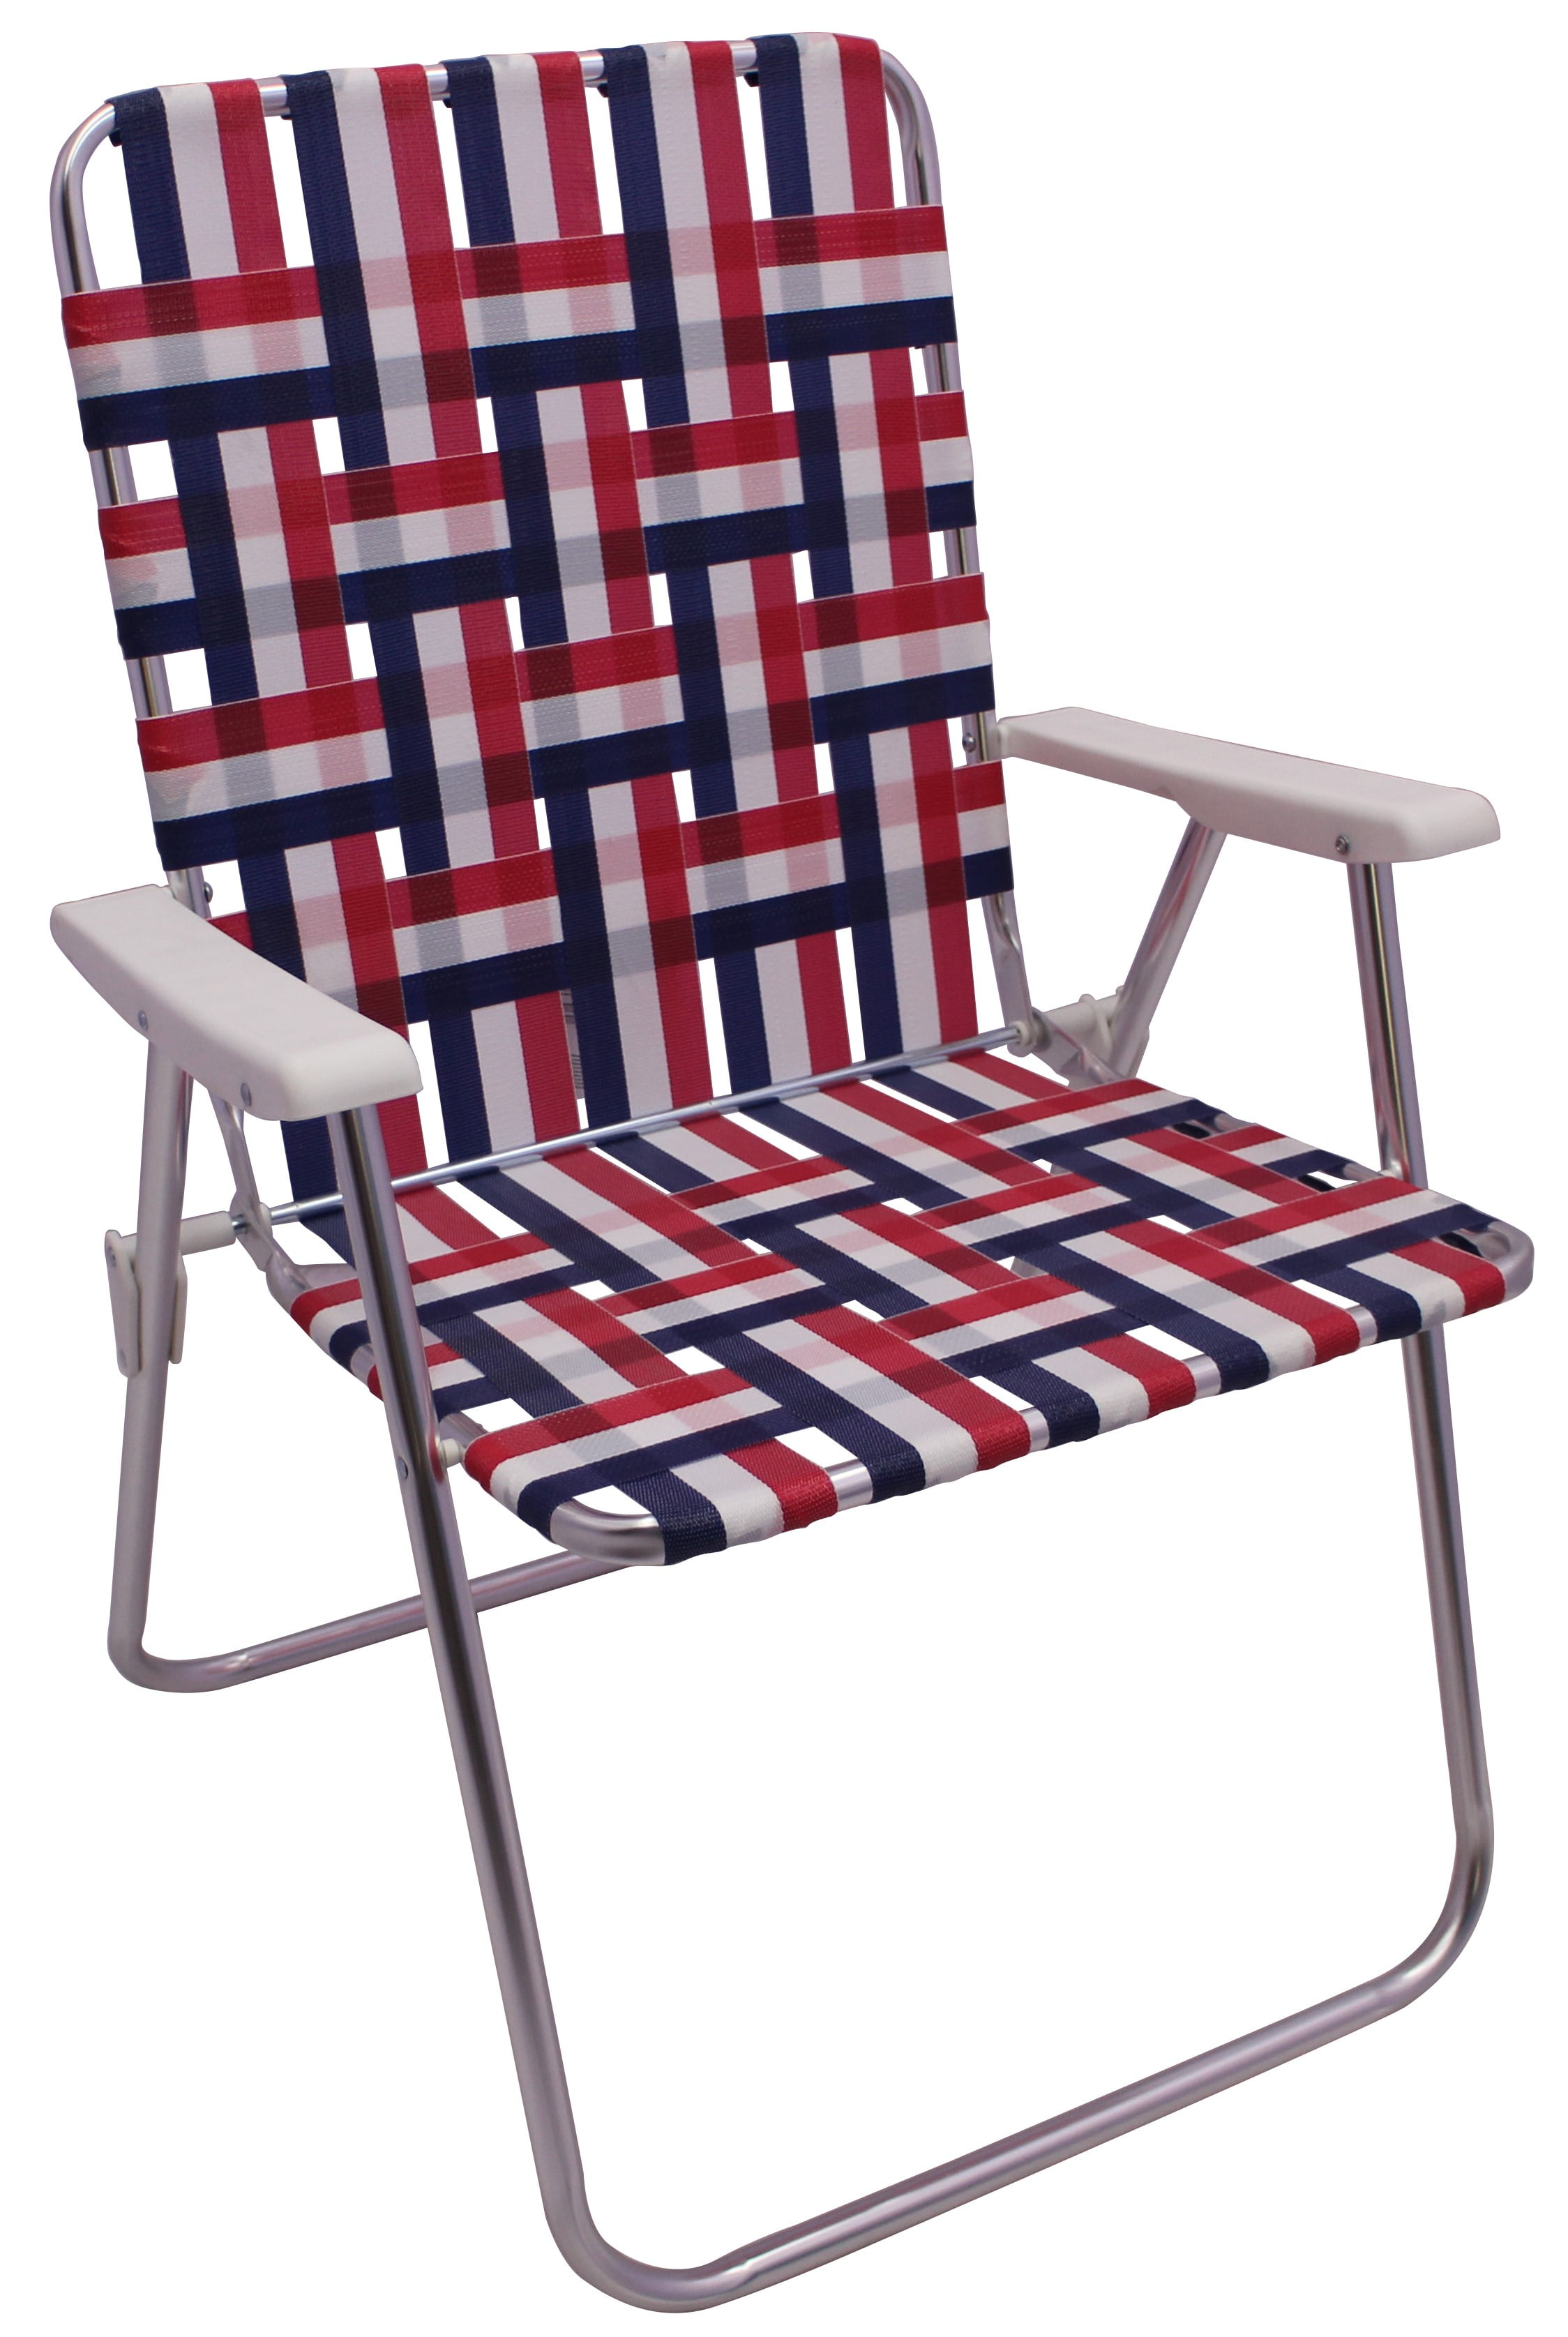 New Mainstays Folding Web Beach Chair for Small Space